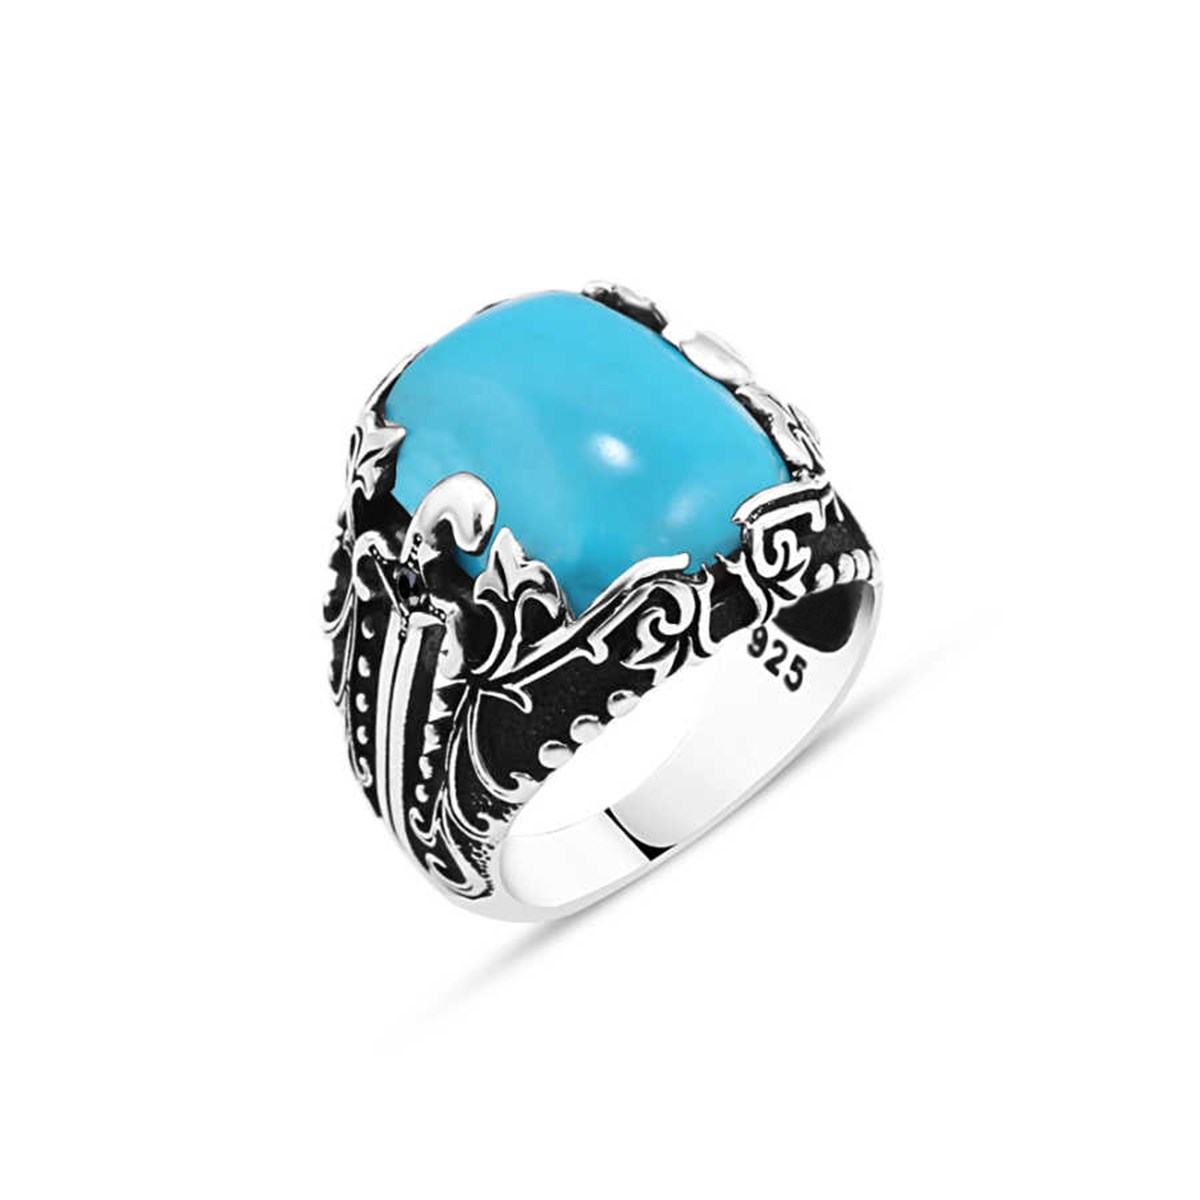 Squeezing Turquoise Stone Sterling Silver Men's Ring